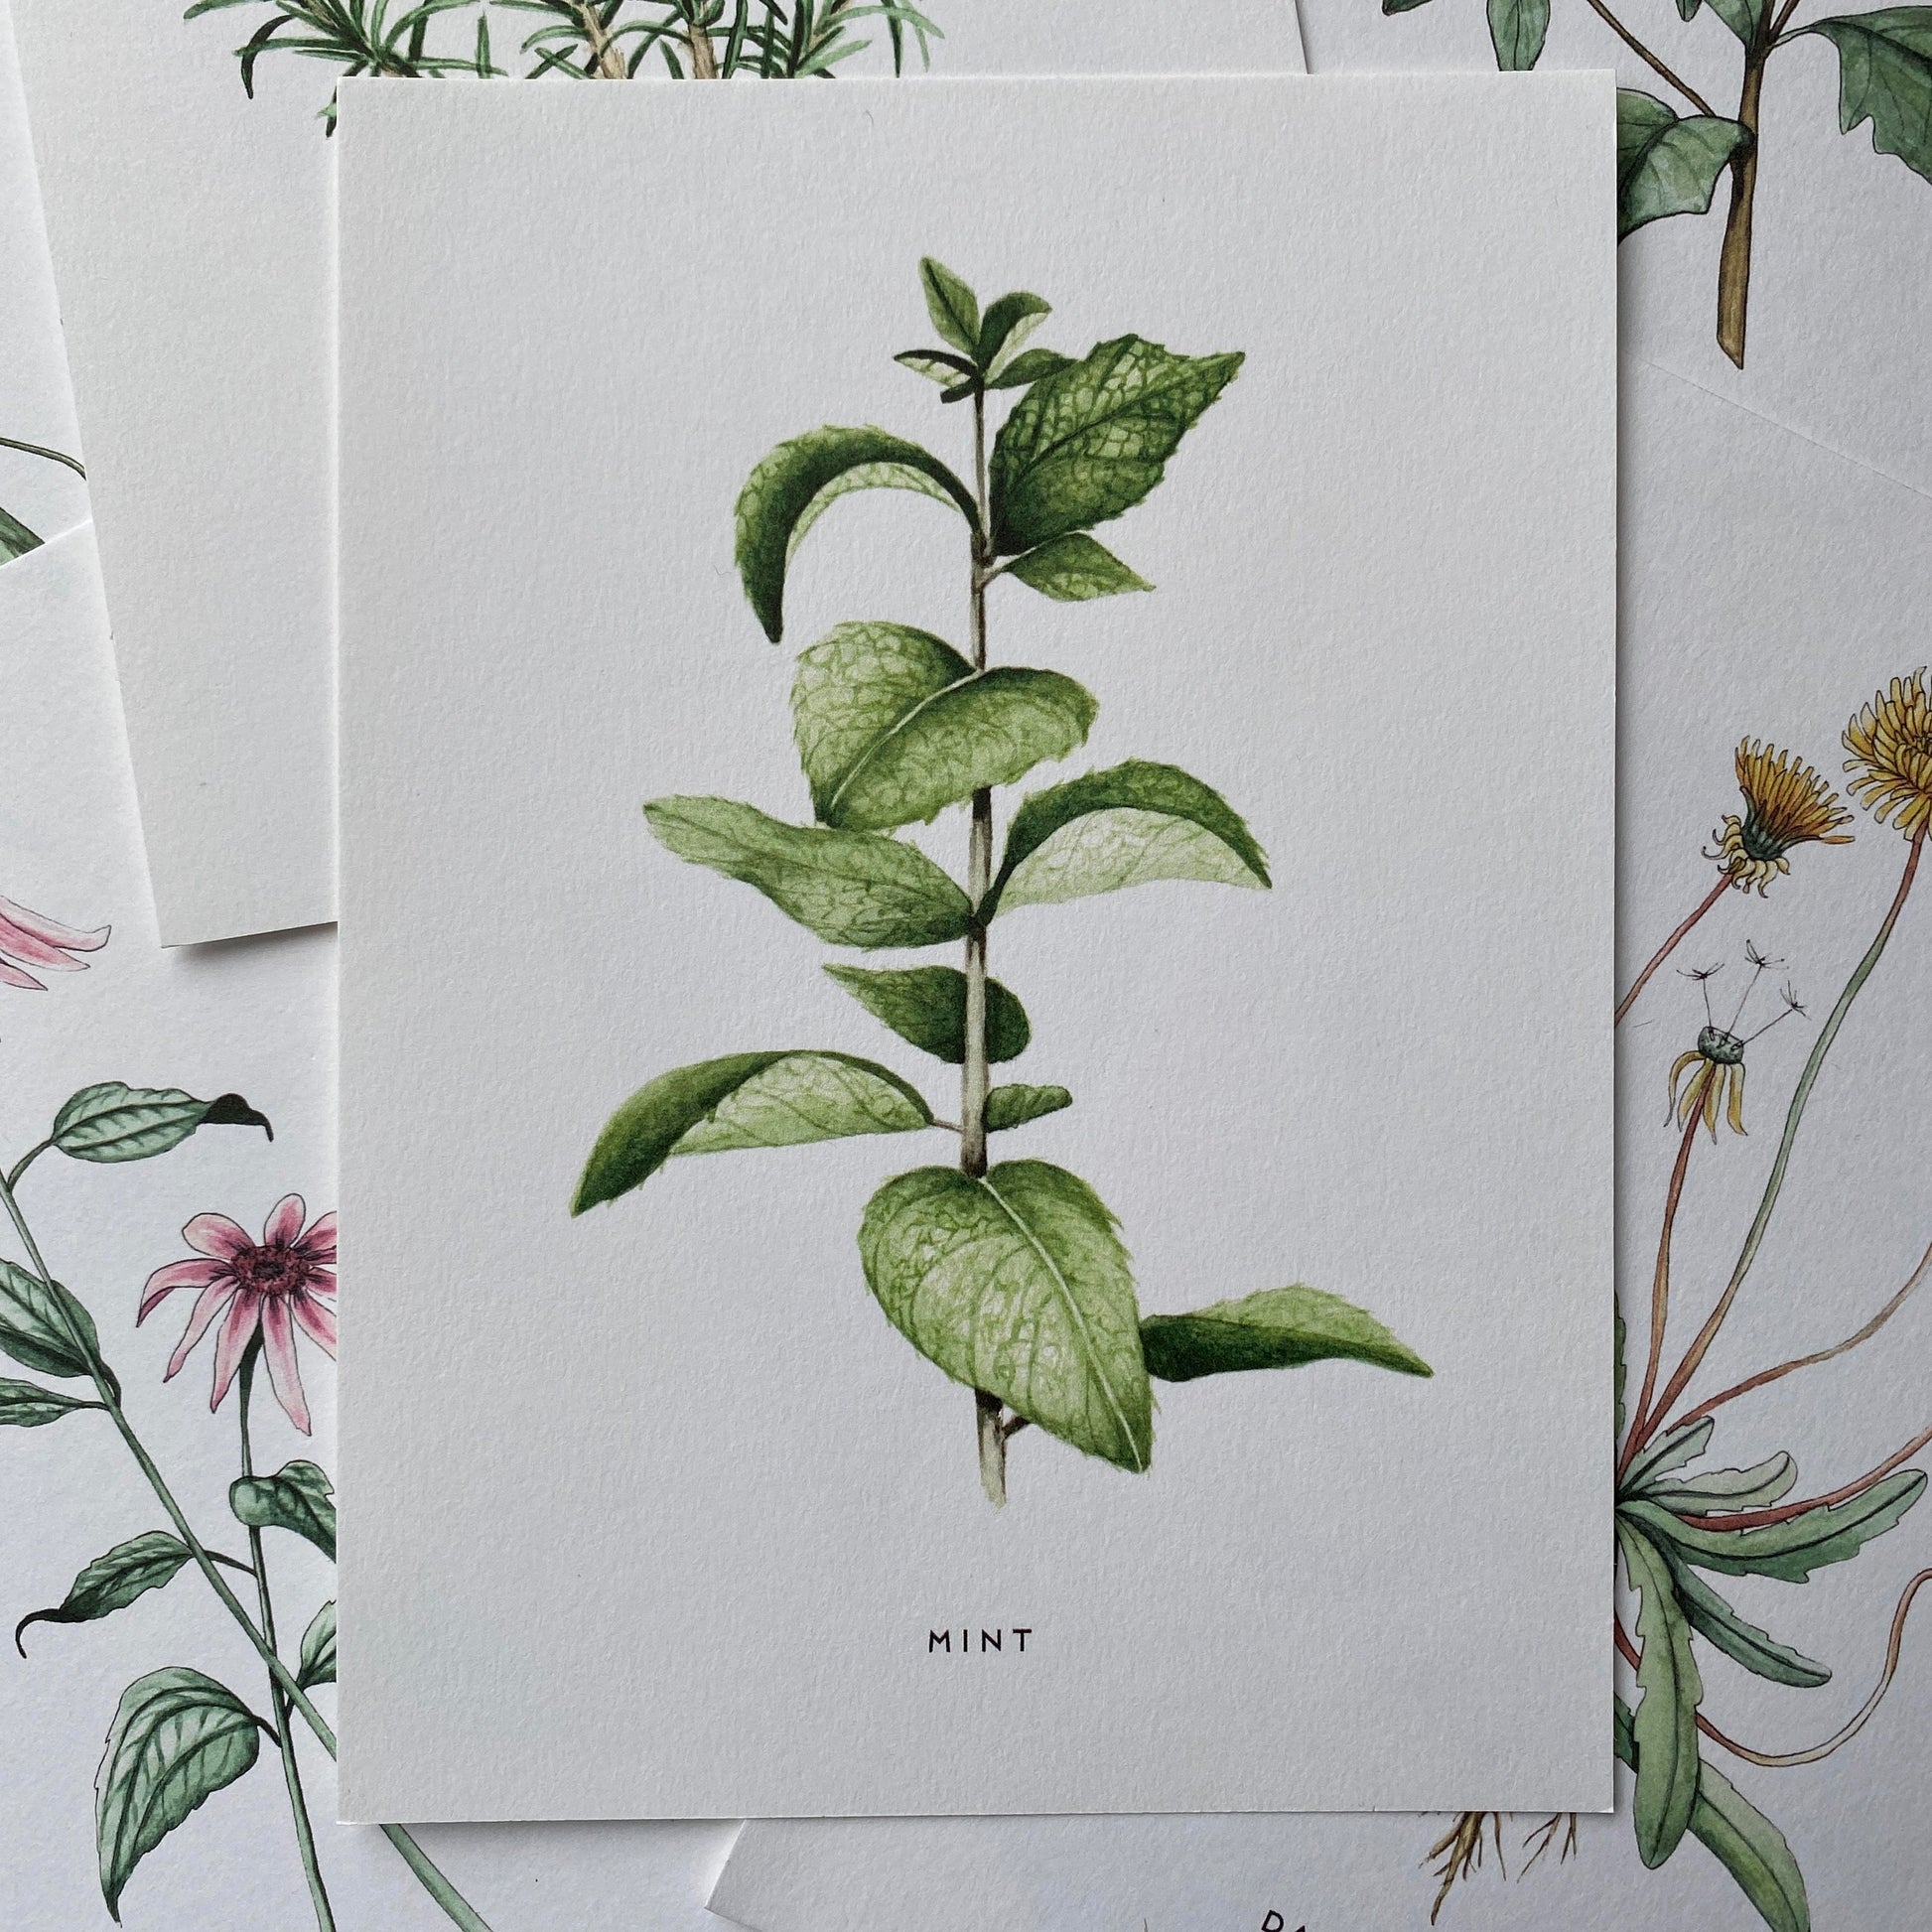 Soft and delicate mint leaves, bright green, painted using watercolour